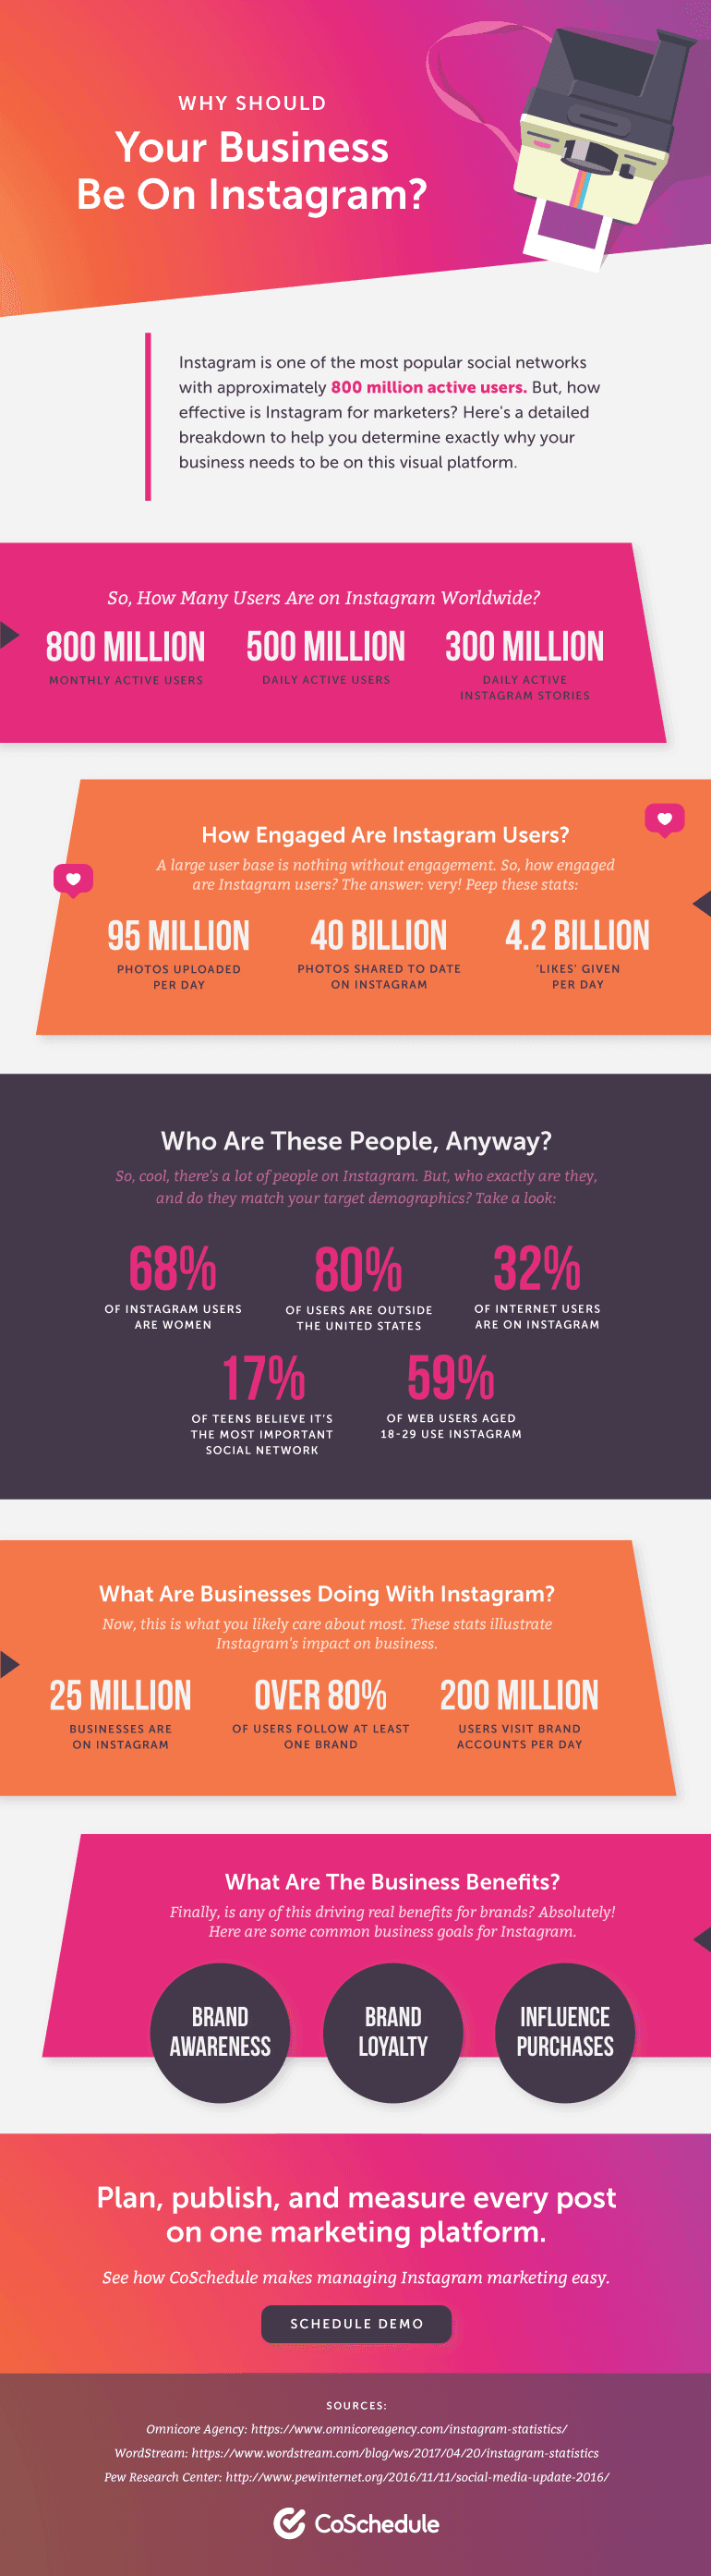 Why Should Your Business Be On Instagram?